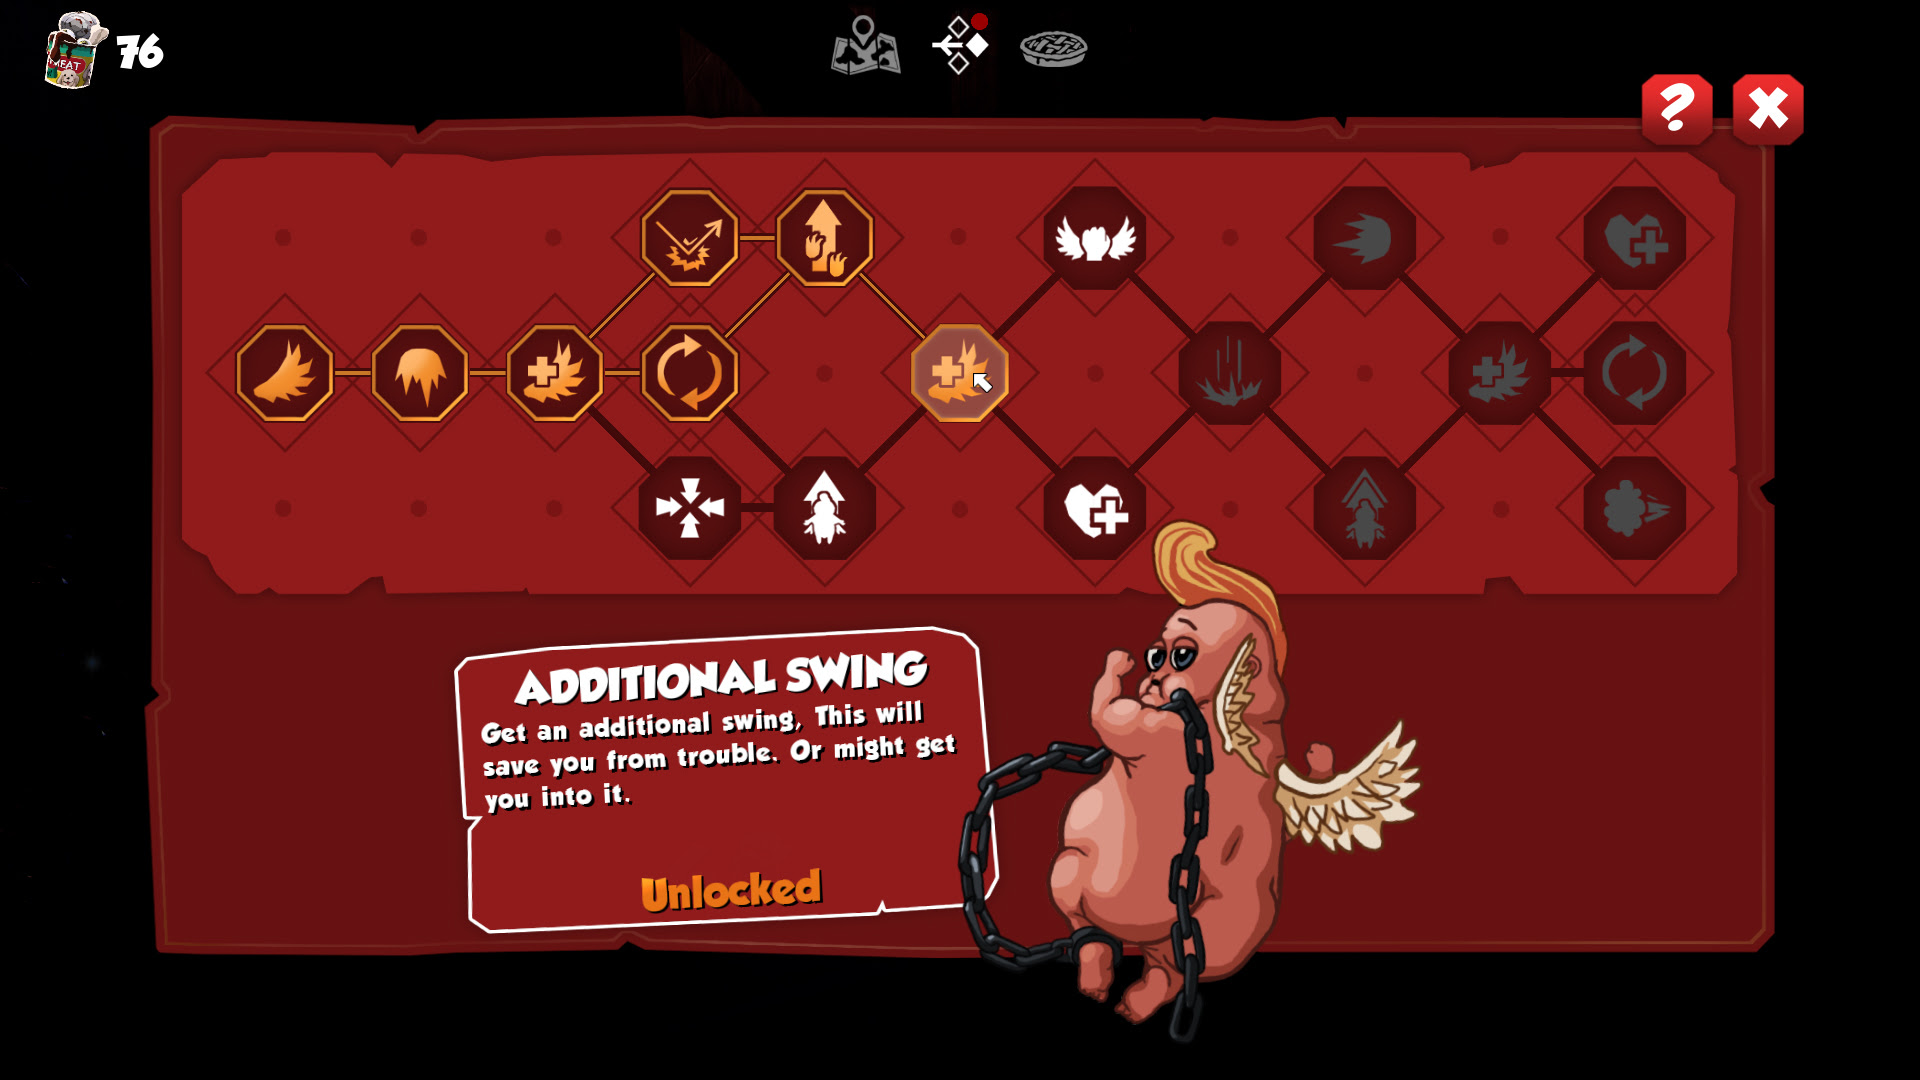 A picture of the skill tree in Hell Pie. There is a picture of Nugget, the pet angel, and the skill that has just been unlocked is called Additional Swing with the effect of "Get an additional swing. This will save you from trouble. Or might get you into it."